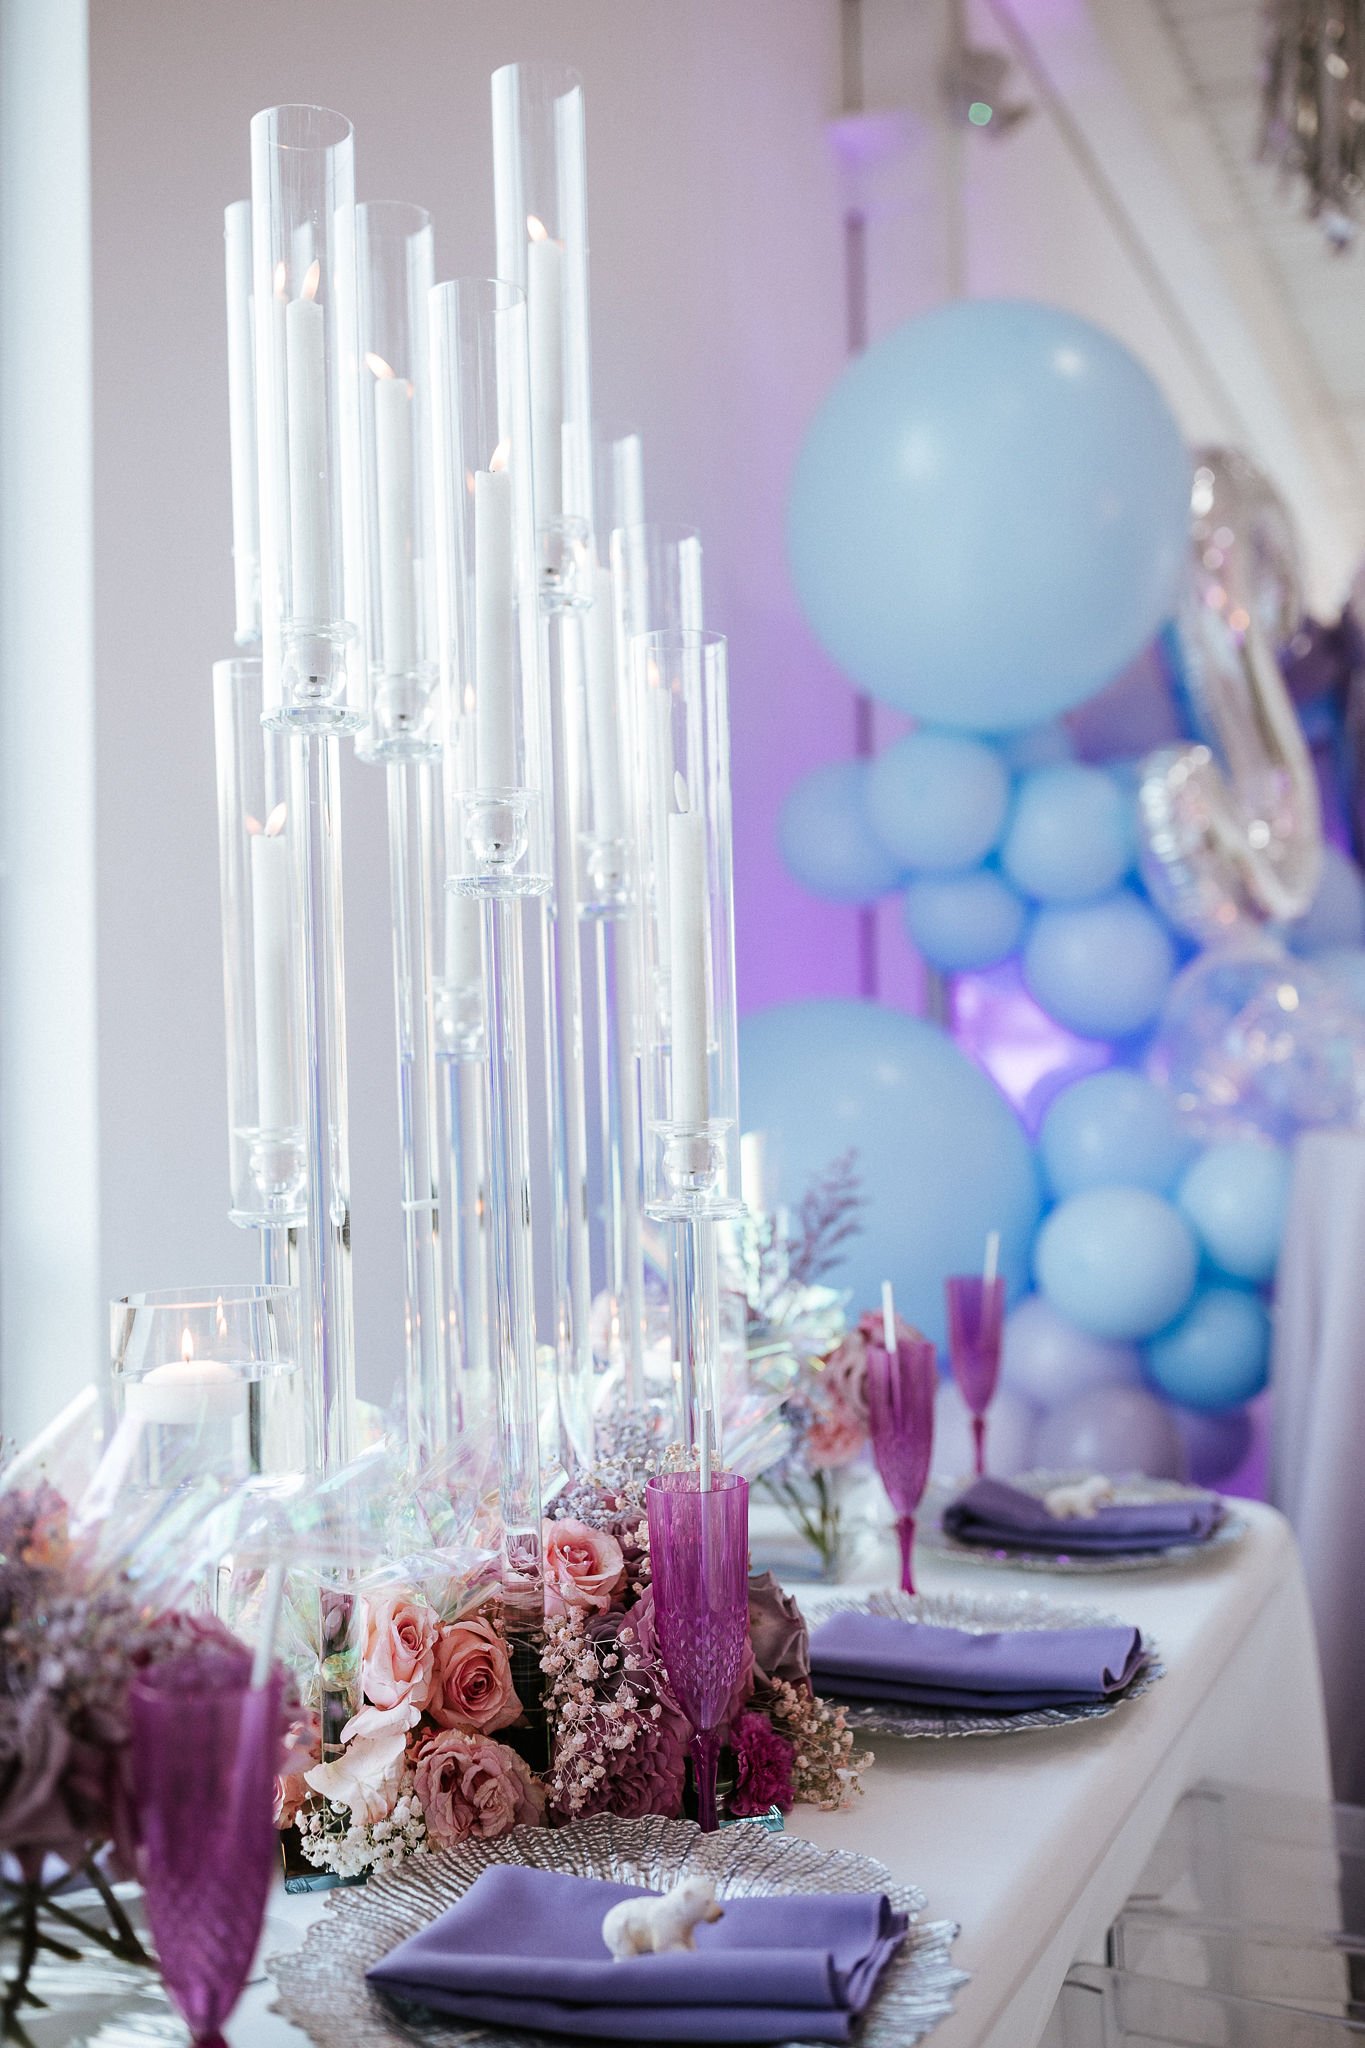 SJR&CoPhotography-TheExperienceEvents1stBirthday-100.jpg